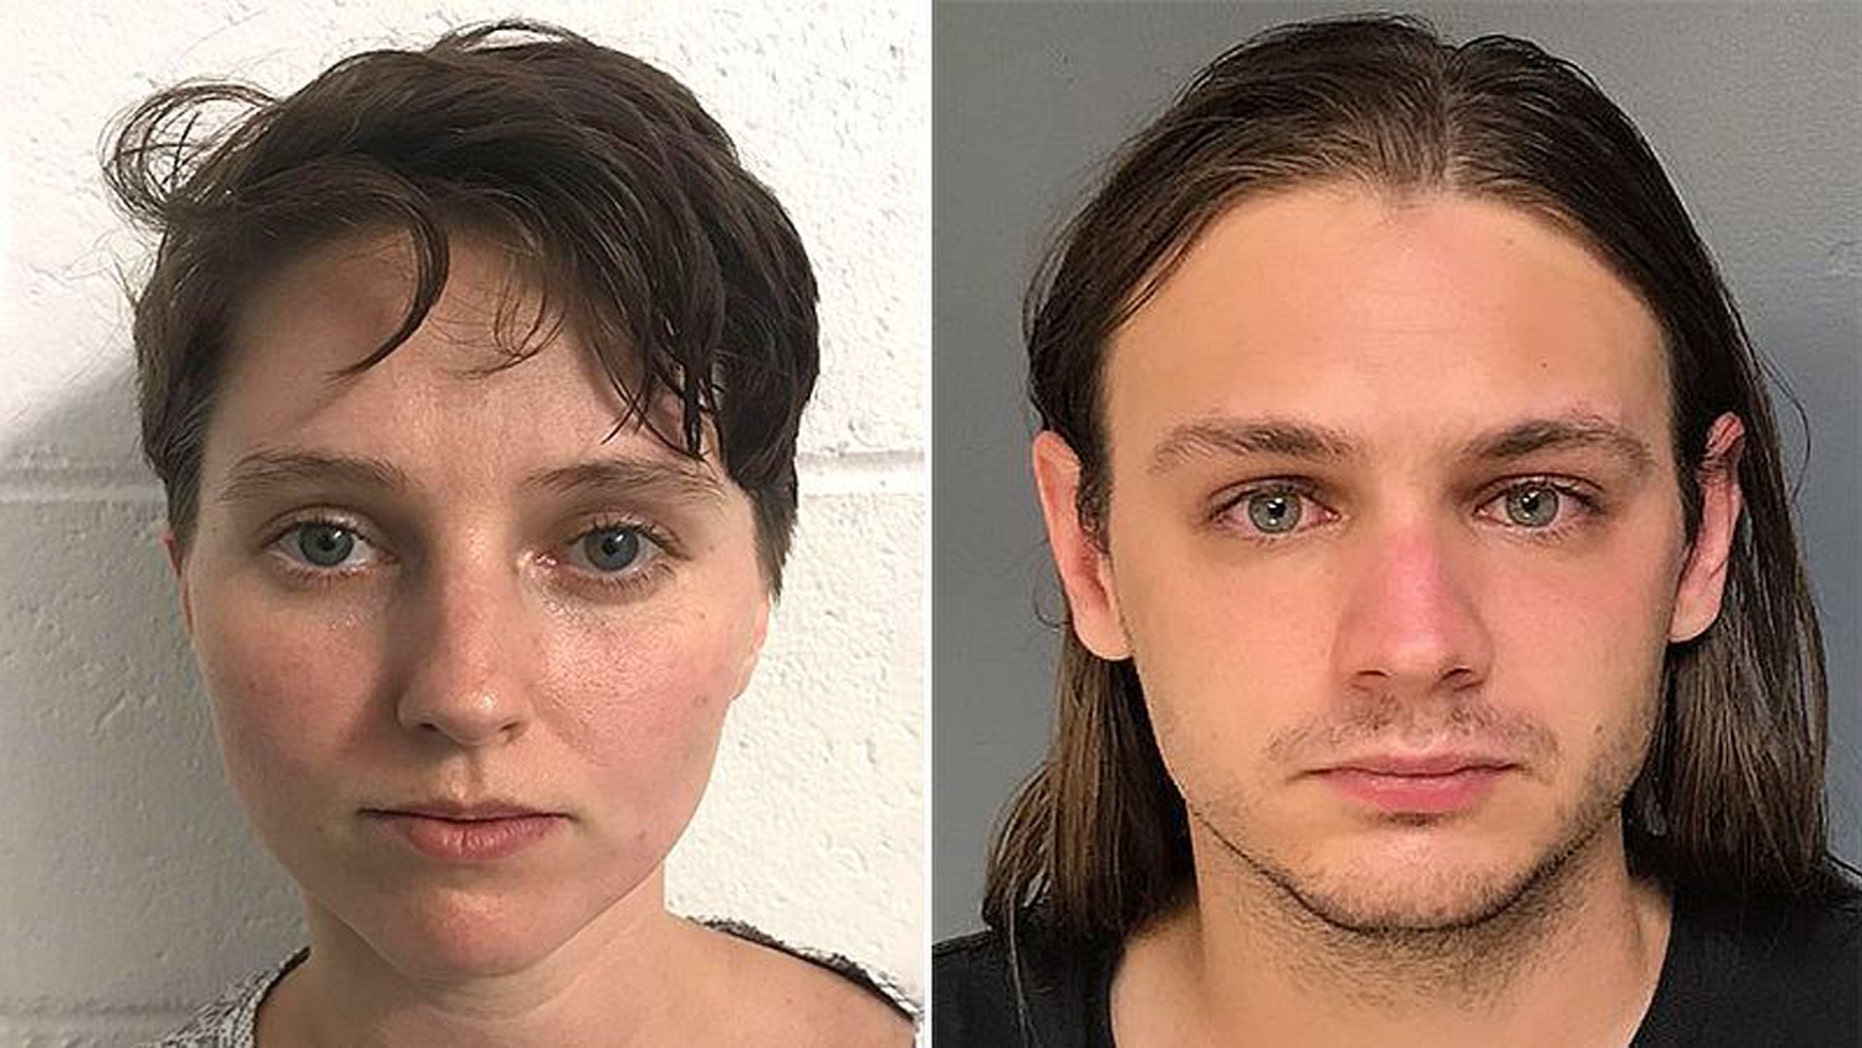 Mom Daughter Facial Porn - Ohio mom allegedly used 3-year-old daughter to make child ...